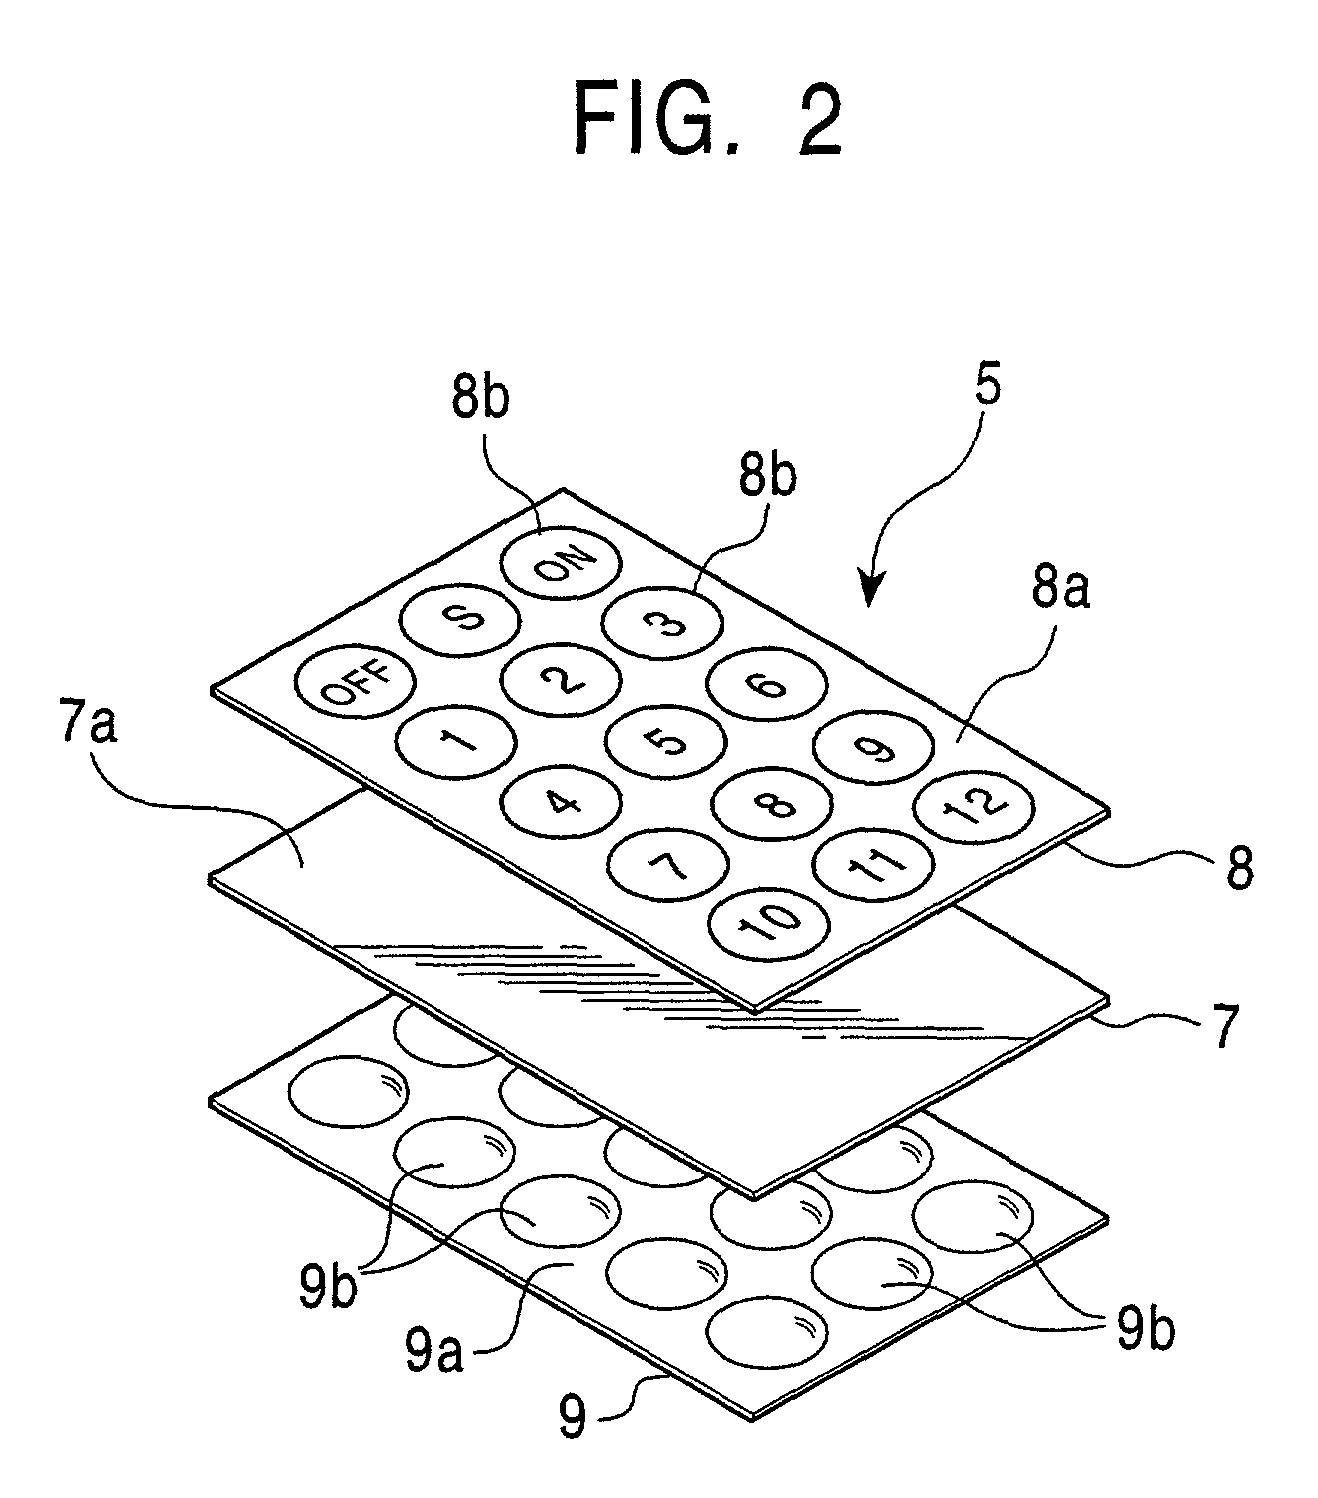 Input device capable of button input and coordinate input on the same operating surface